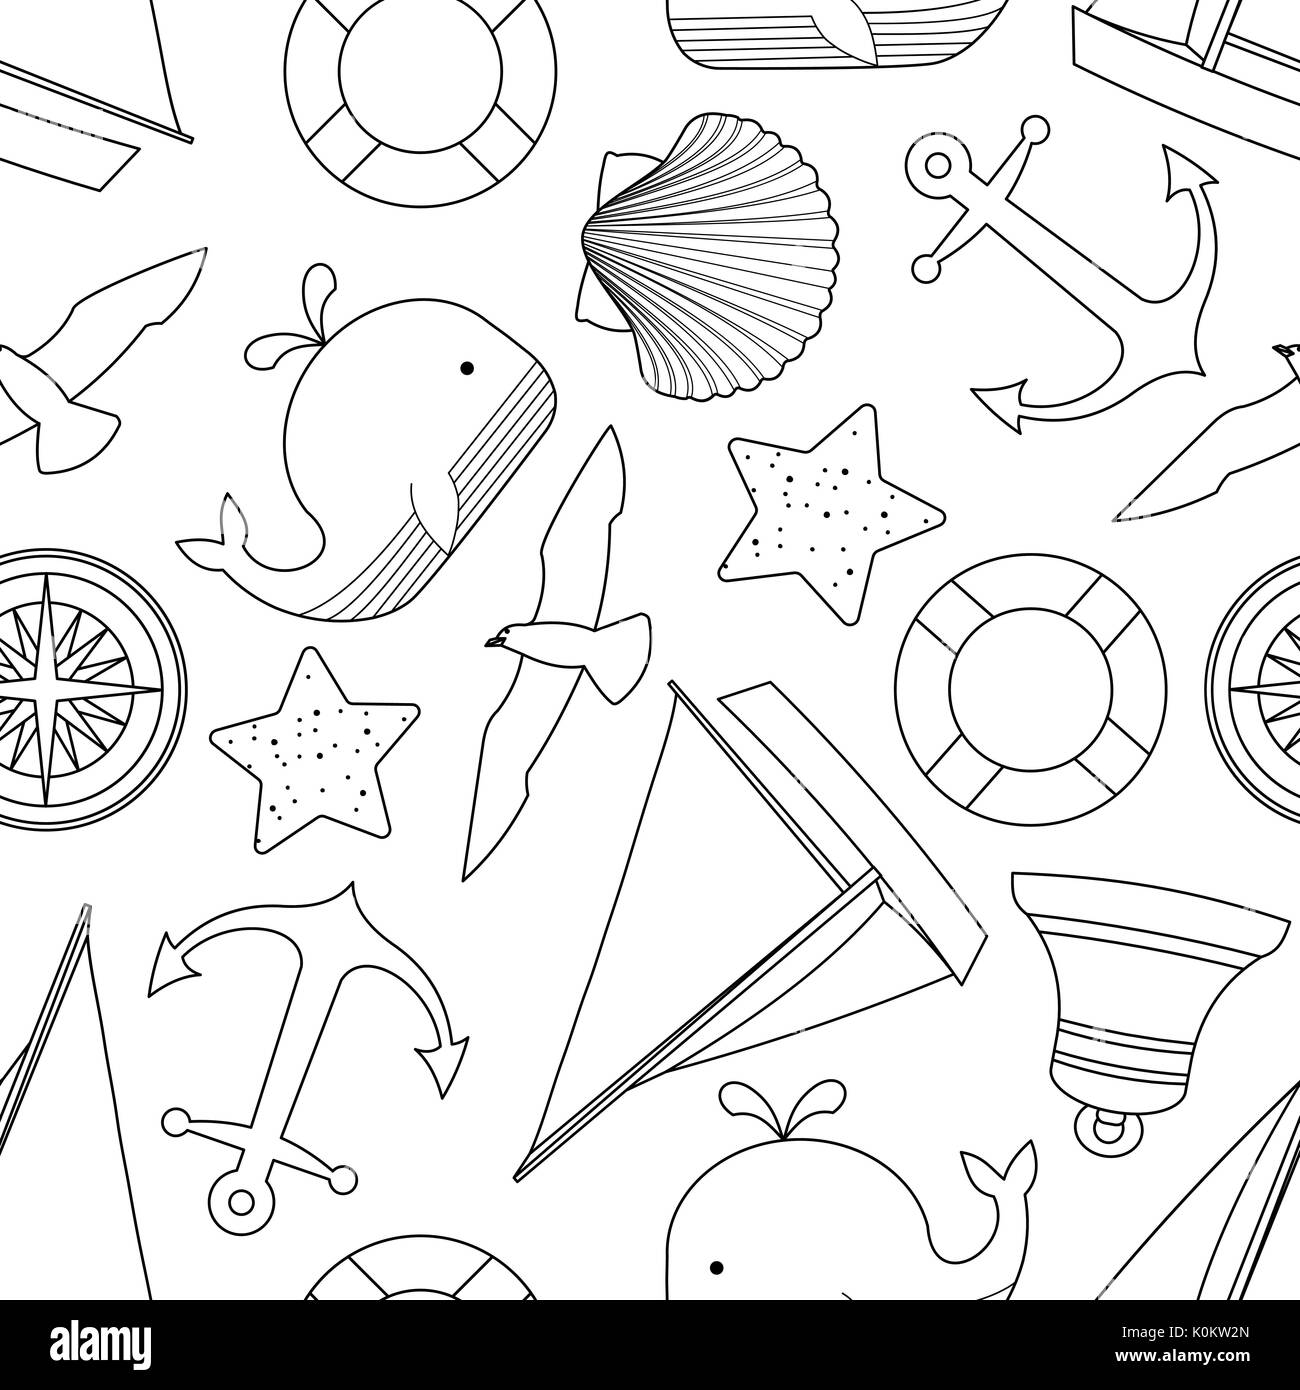 Random happy nautical in black outline and white plane on white background. Seamless pattern vectoe illustration. Stock Vector